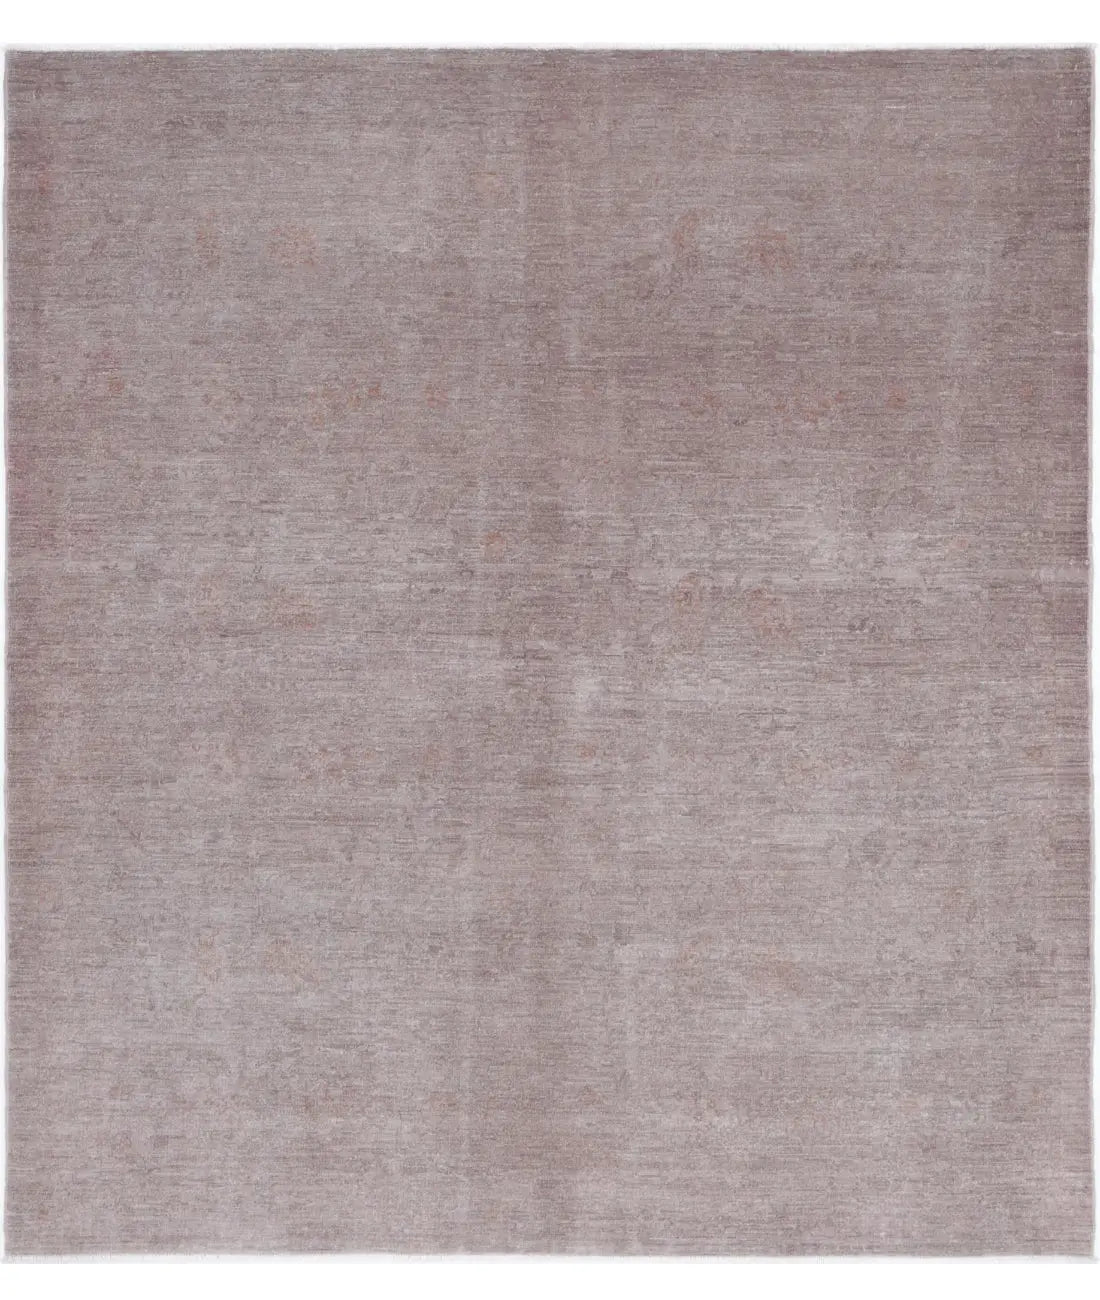 Hand Knotted Overdye Wool Rug - 5'10'' x 6'6''